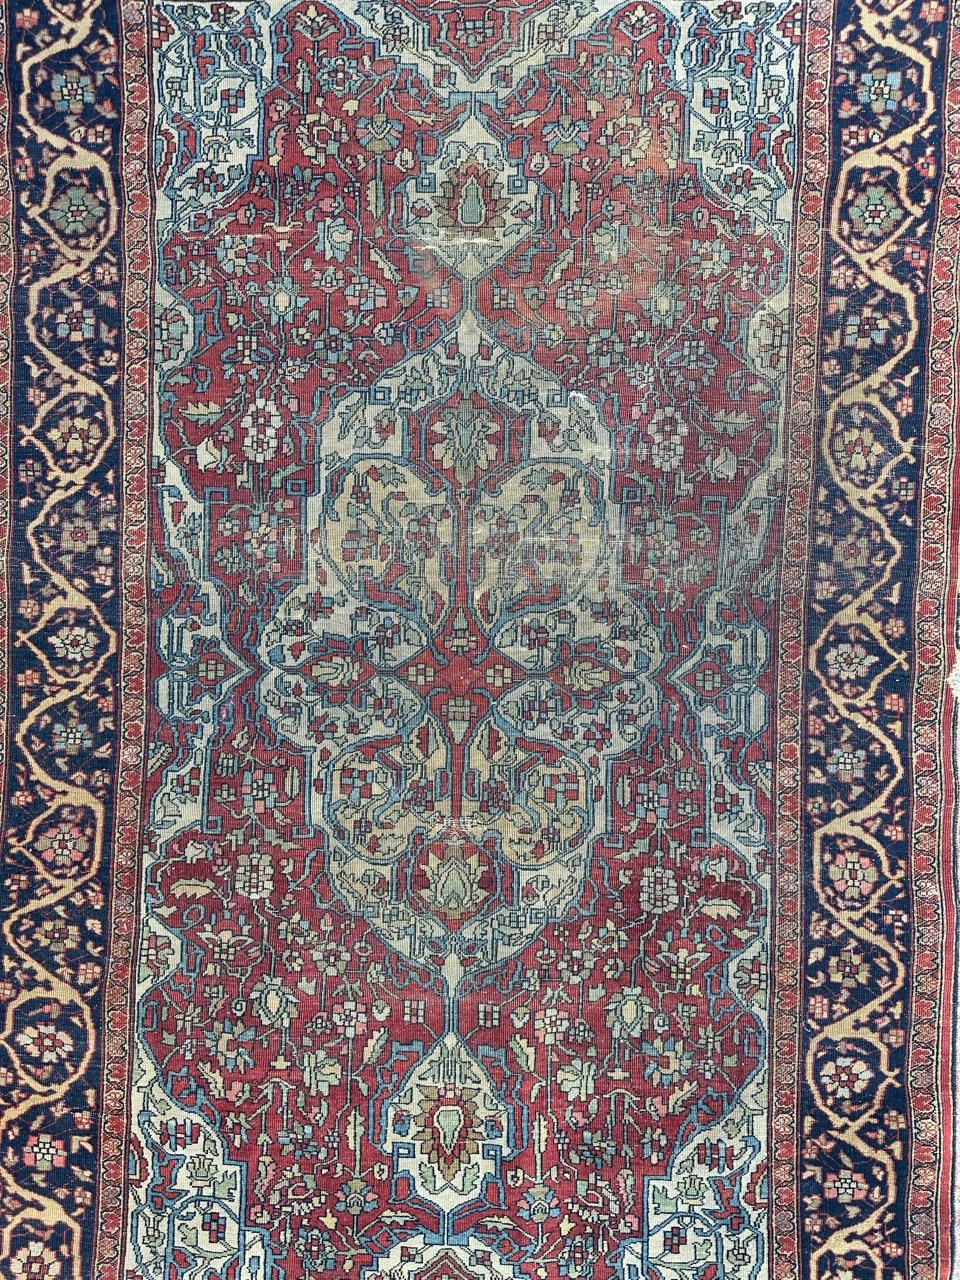 Exquisite antique Sarouk Ferahan carpet, intricately handwoven towards the late 19th century. This stunning piece features a symmetrical, stylized floral motif with a central white medallion surrounded by vibrant red, light blue, and pale green